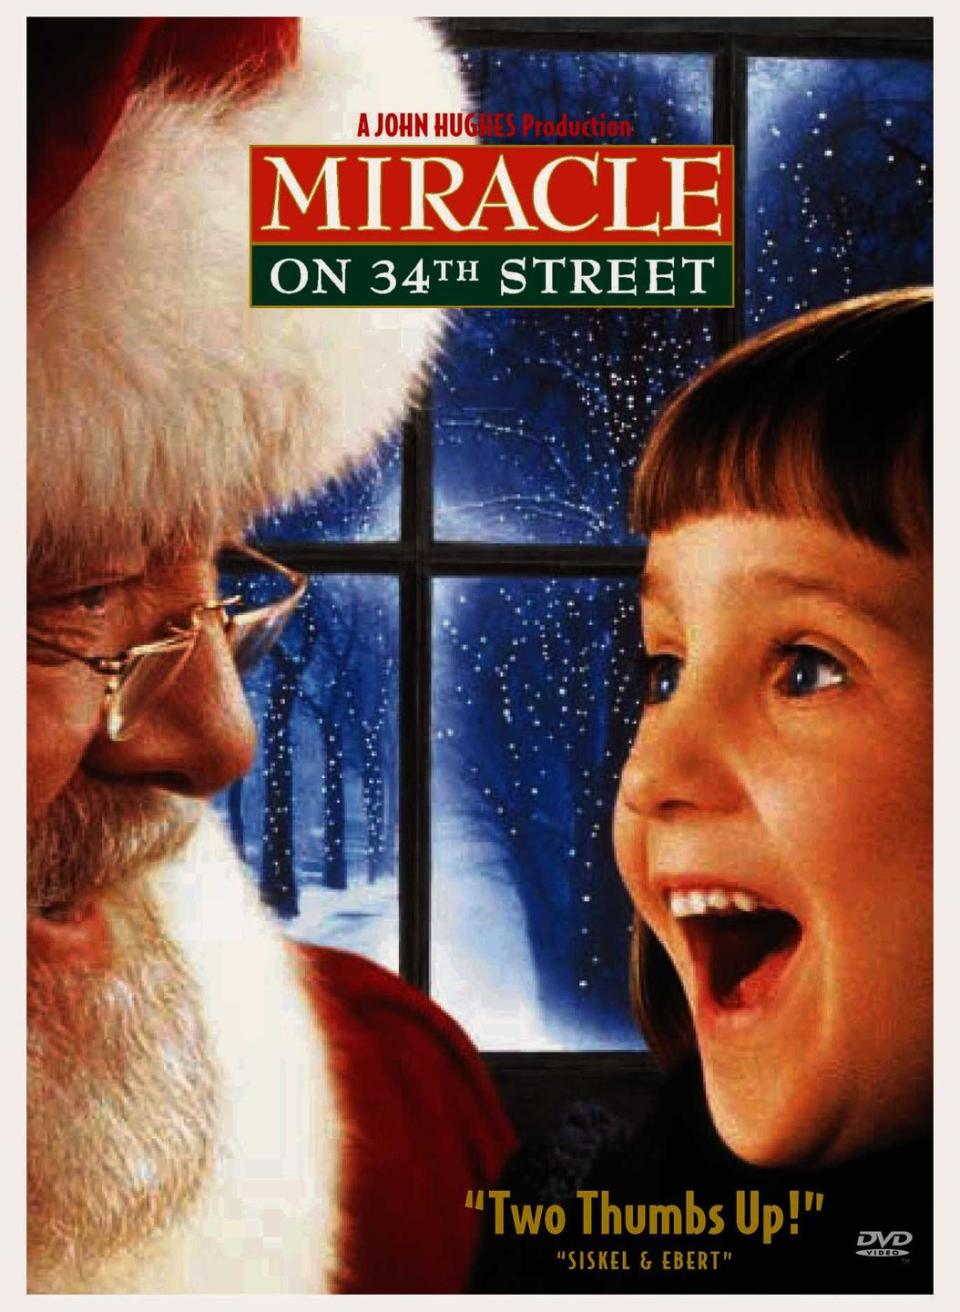 "Miracle on 34th Street" (1994)